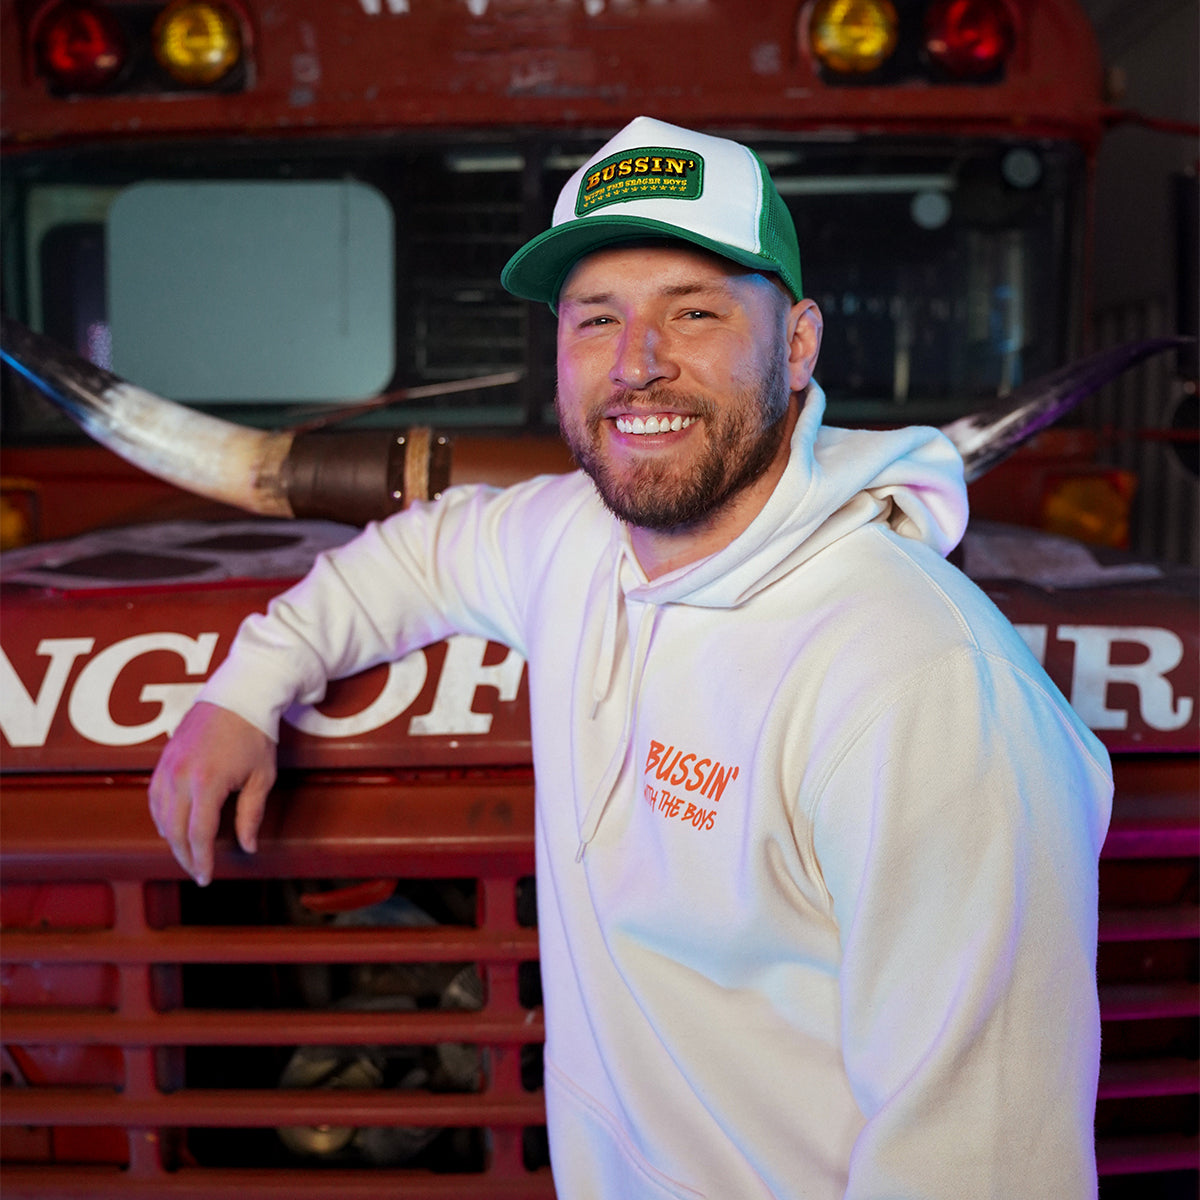 Seager x Bussin With The Boys Tailgators Hoodie-Hoodies & Sweatshirts-Bussin With The Boys-Barstool Sports